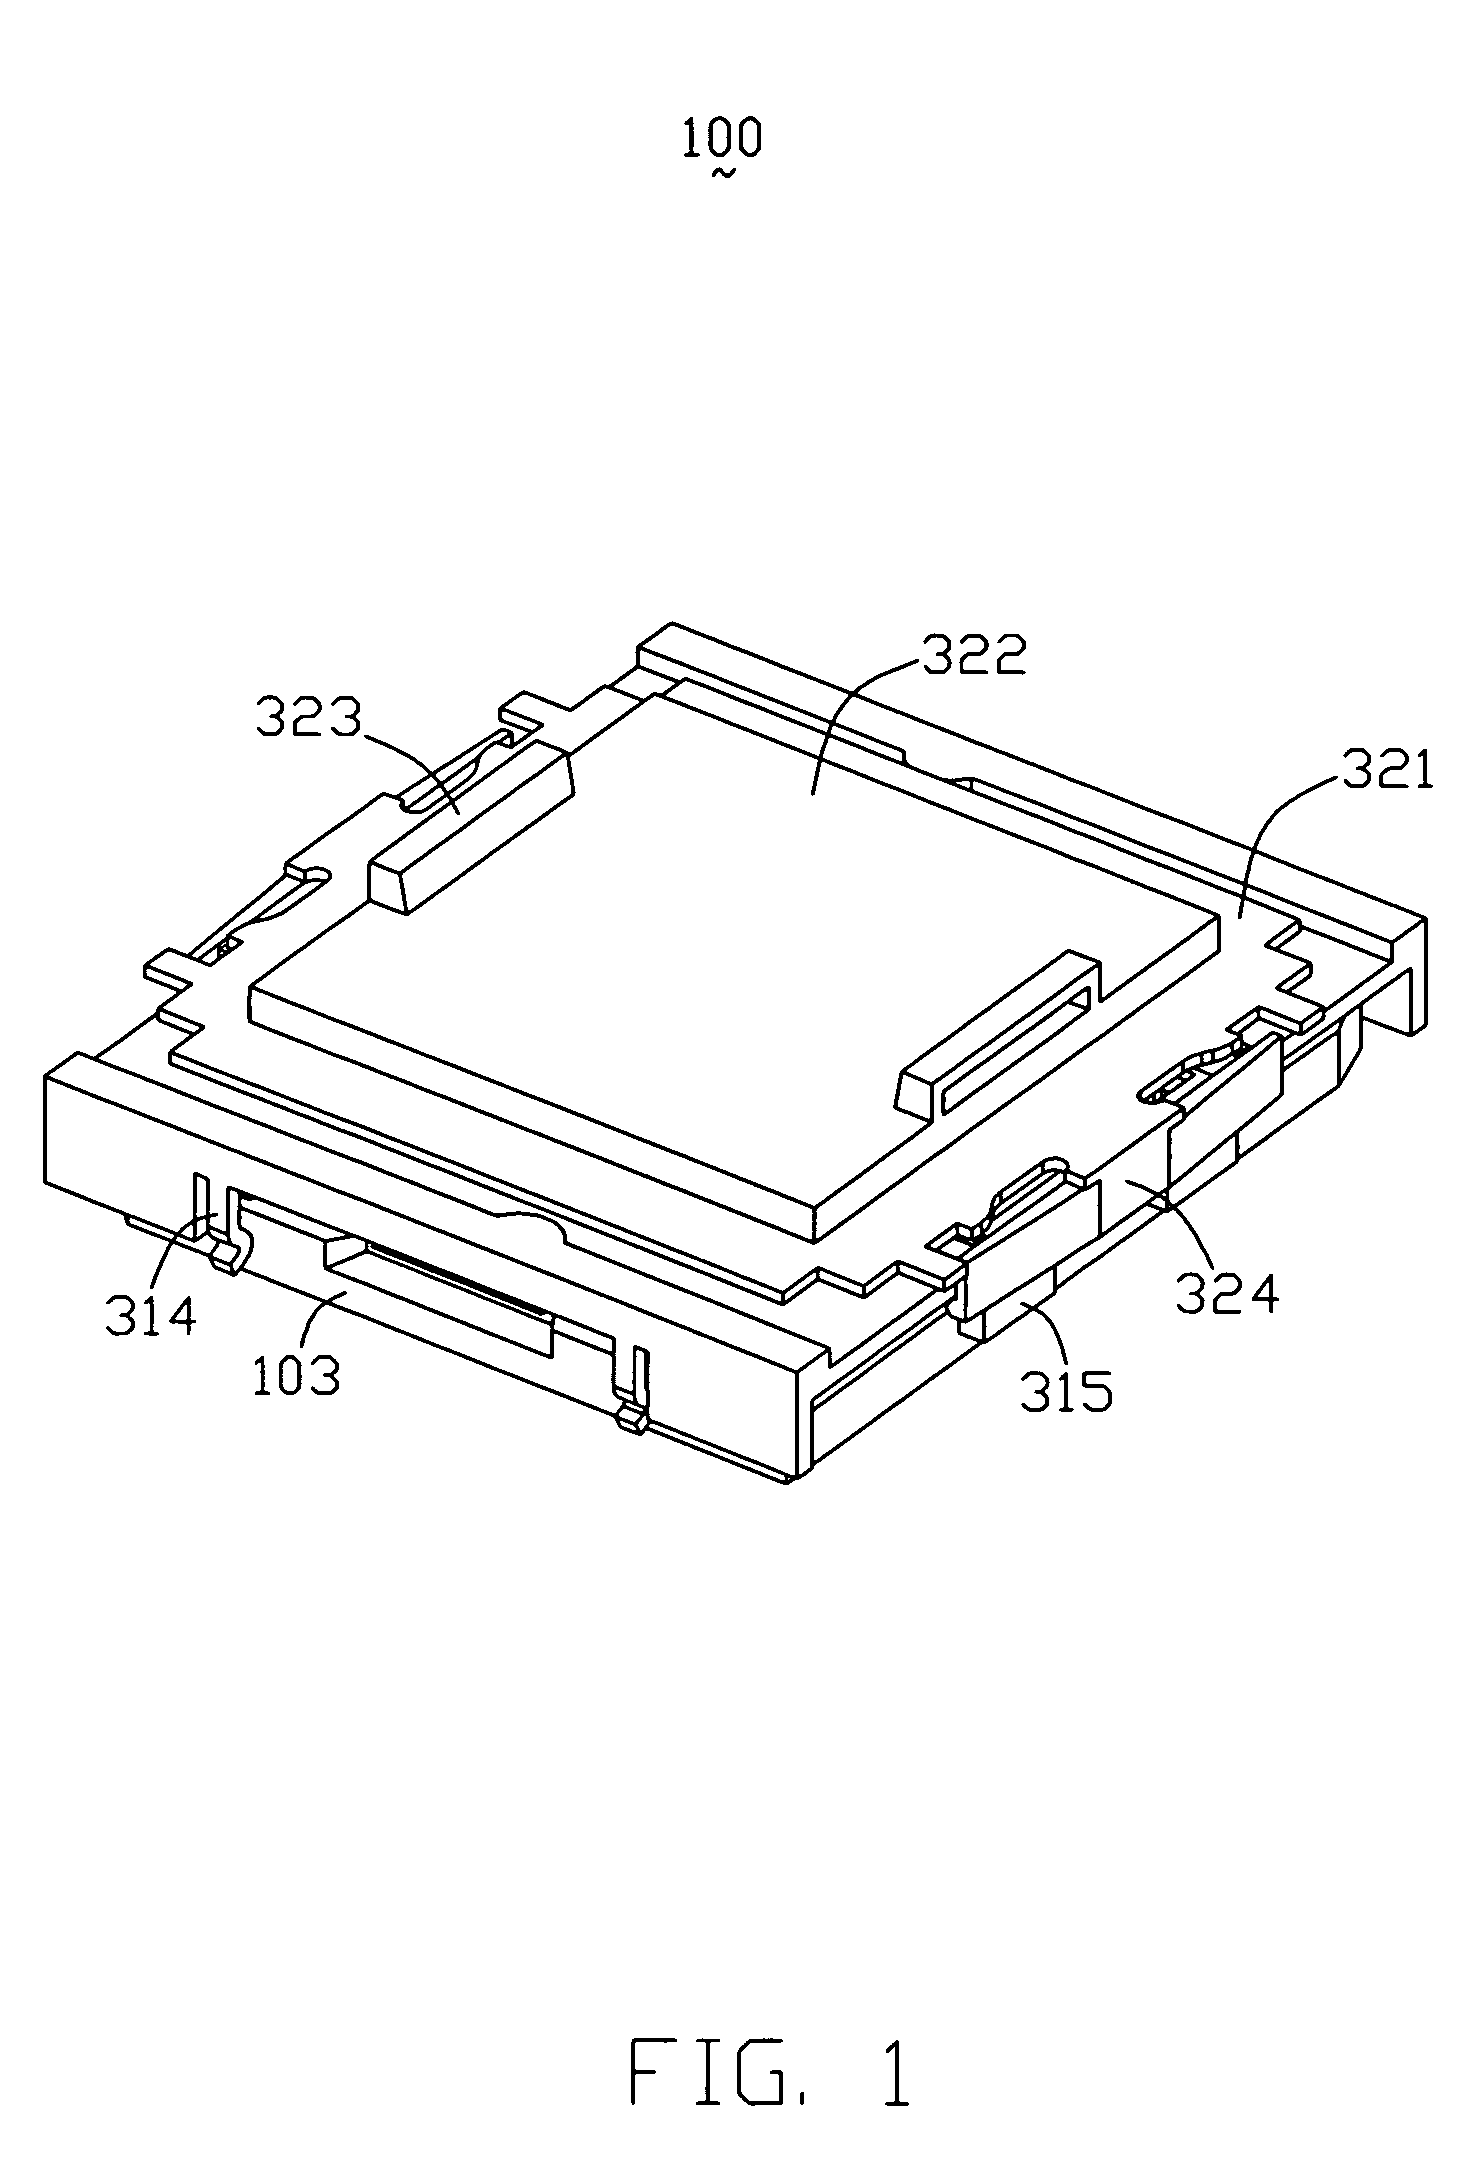 CPU socket assembly with package retention mechanism